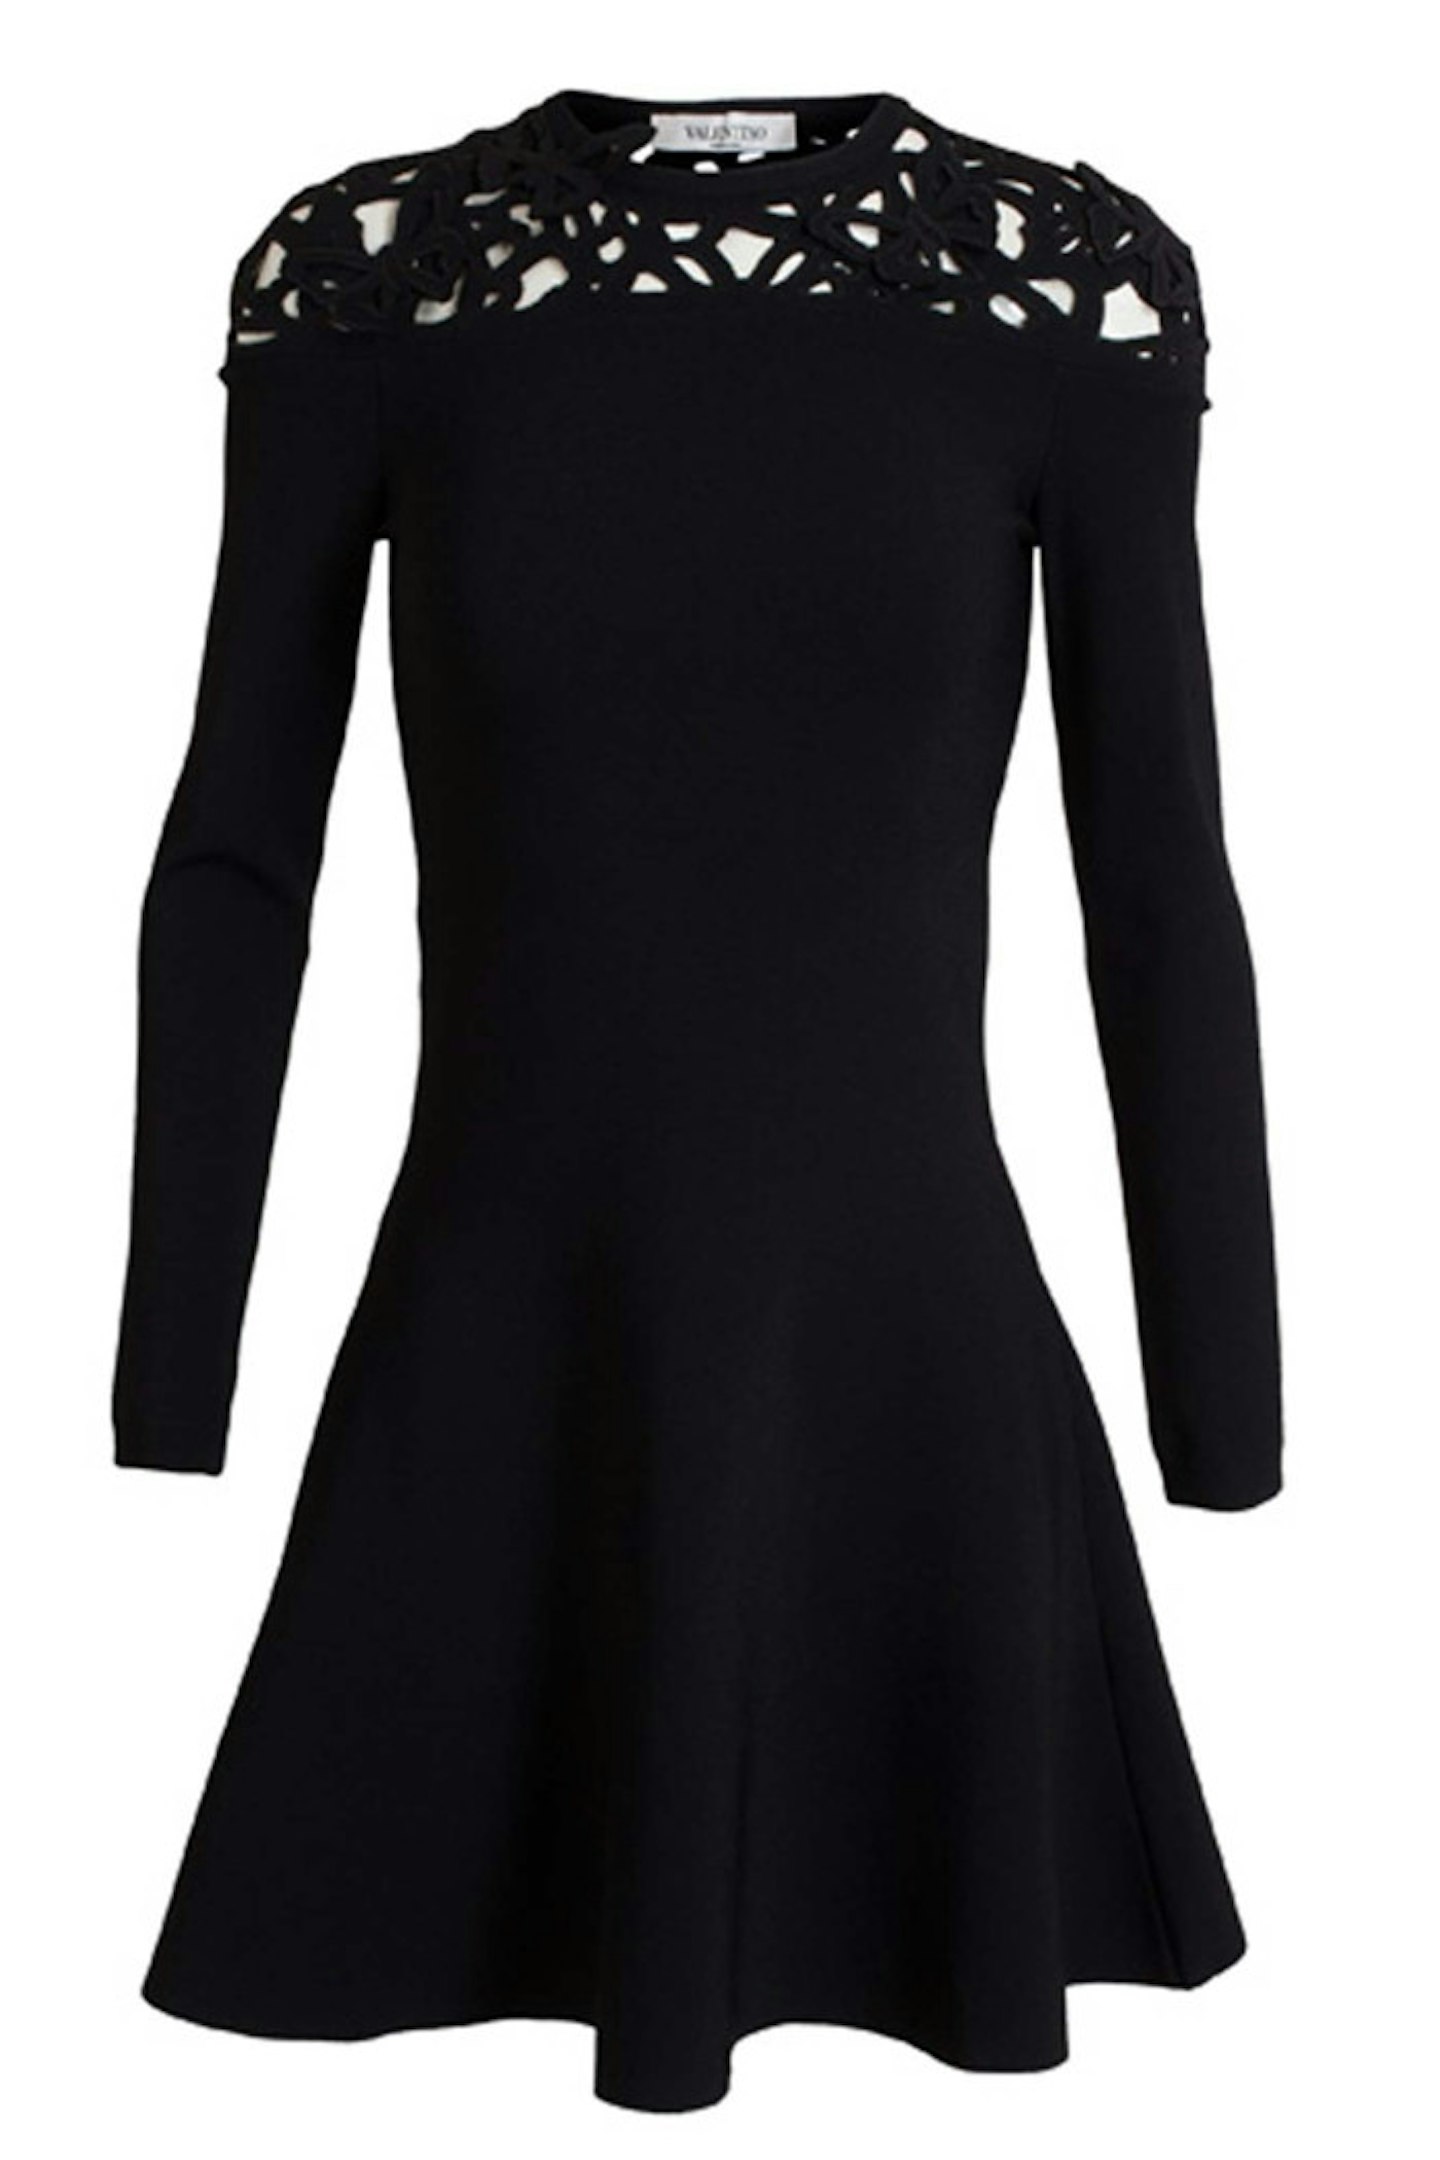 43. Butterfly Detail Knit Dress, £1720, Valentino at Browns Fashion